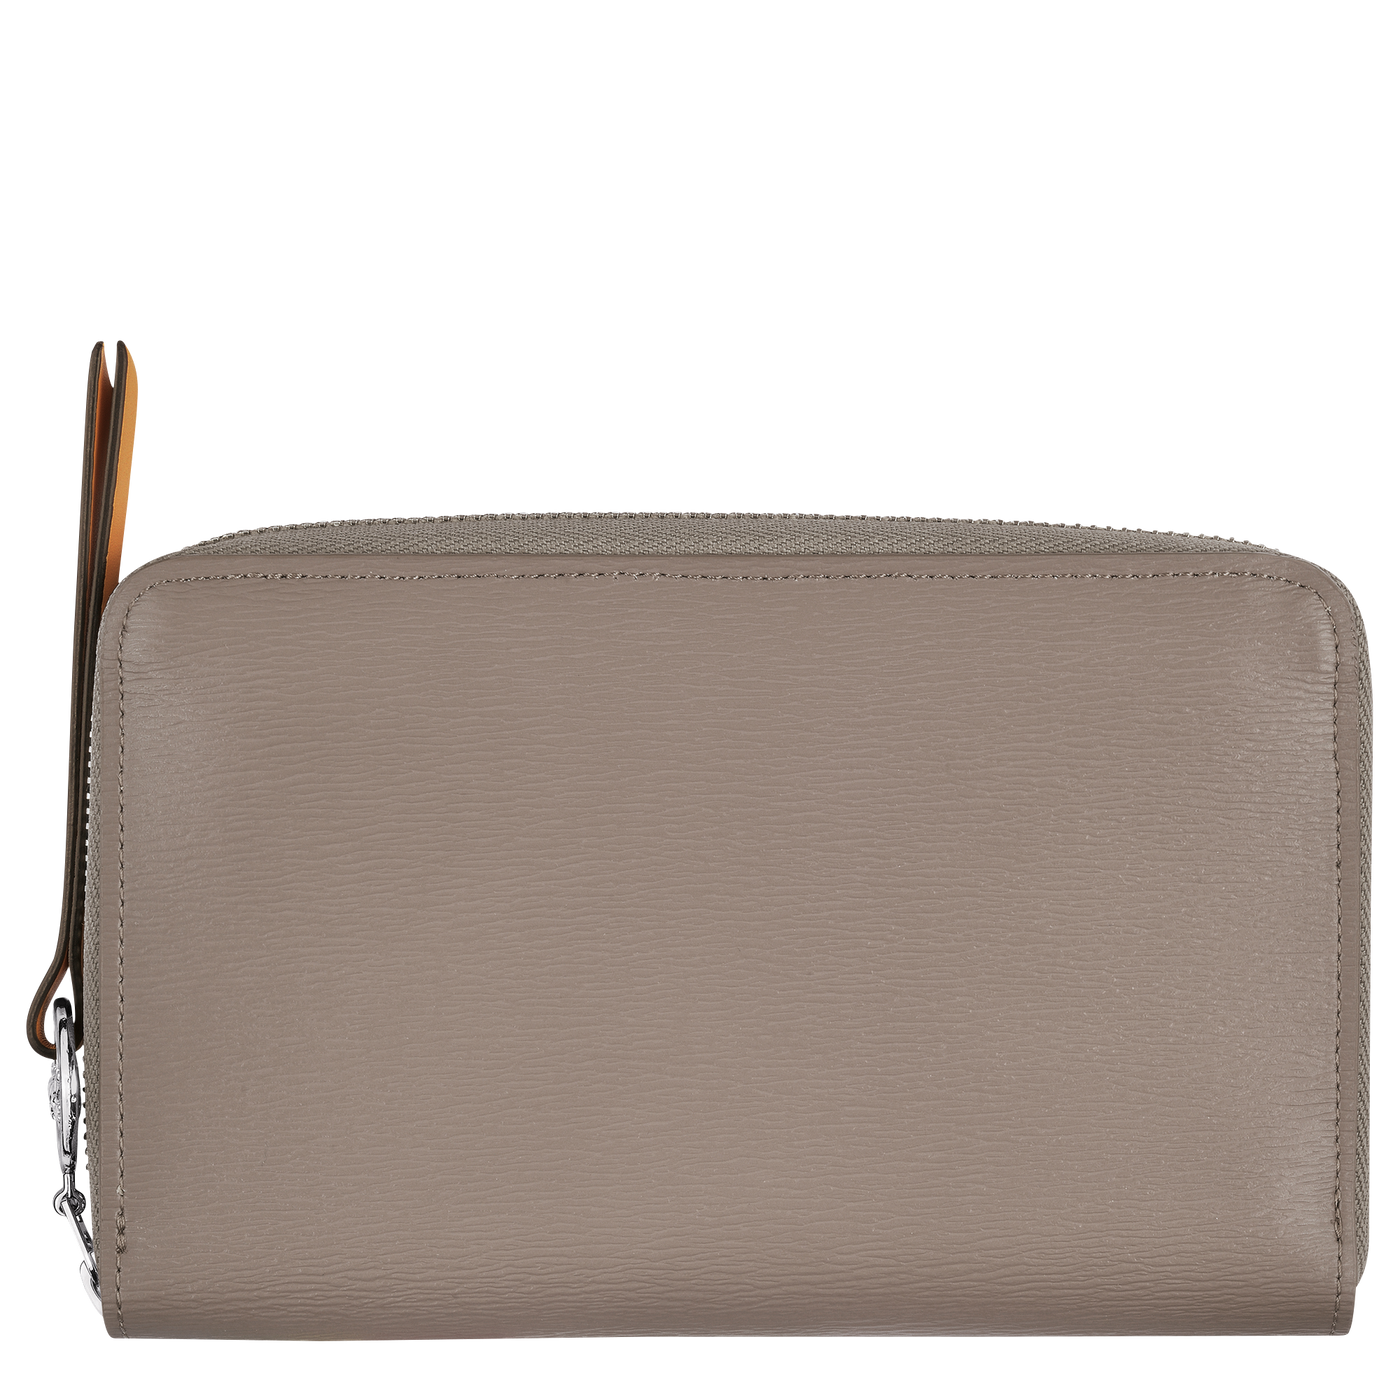 Shop The Latest Collection Of Longchamp Le Pliage City Wallet - 3622Hyq In Lebanon